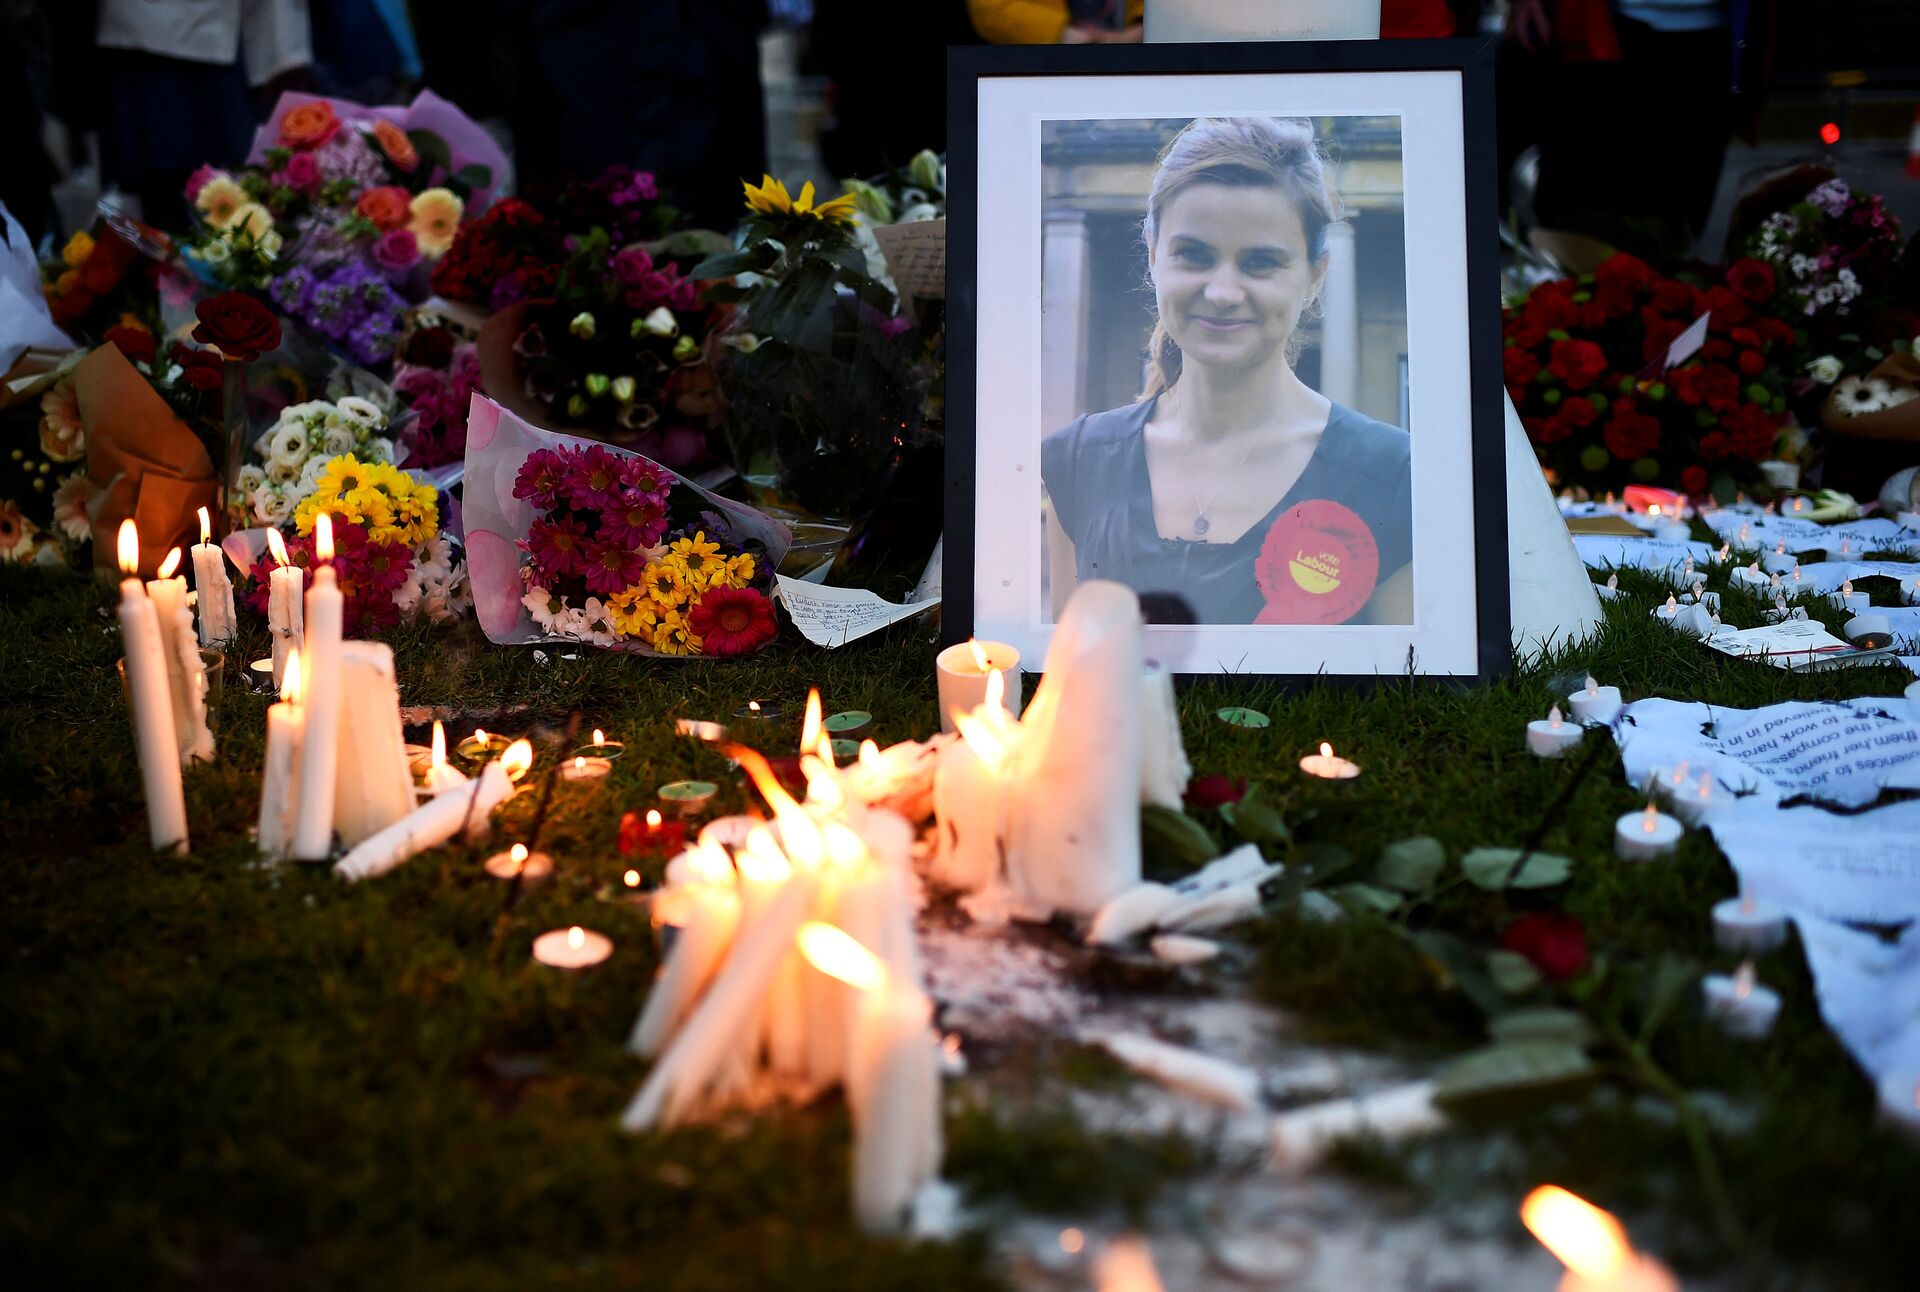 Mourners leave candles in memory of murdered Labour Party MP Jo Cox, who was shot dead in Birstall, during a vigil at Parliament Square in London, Britain June 17, 2016 - Sputnik International, 1920, 21.10.2021